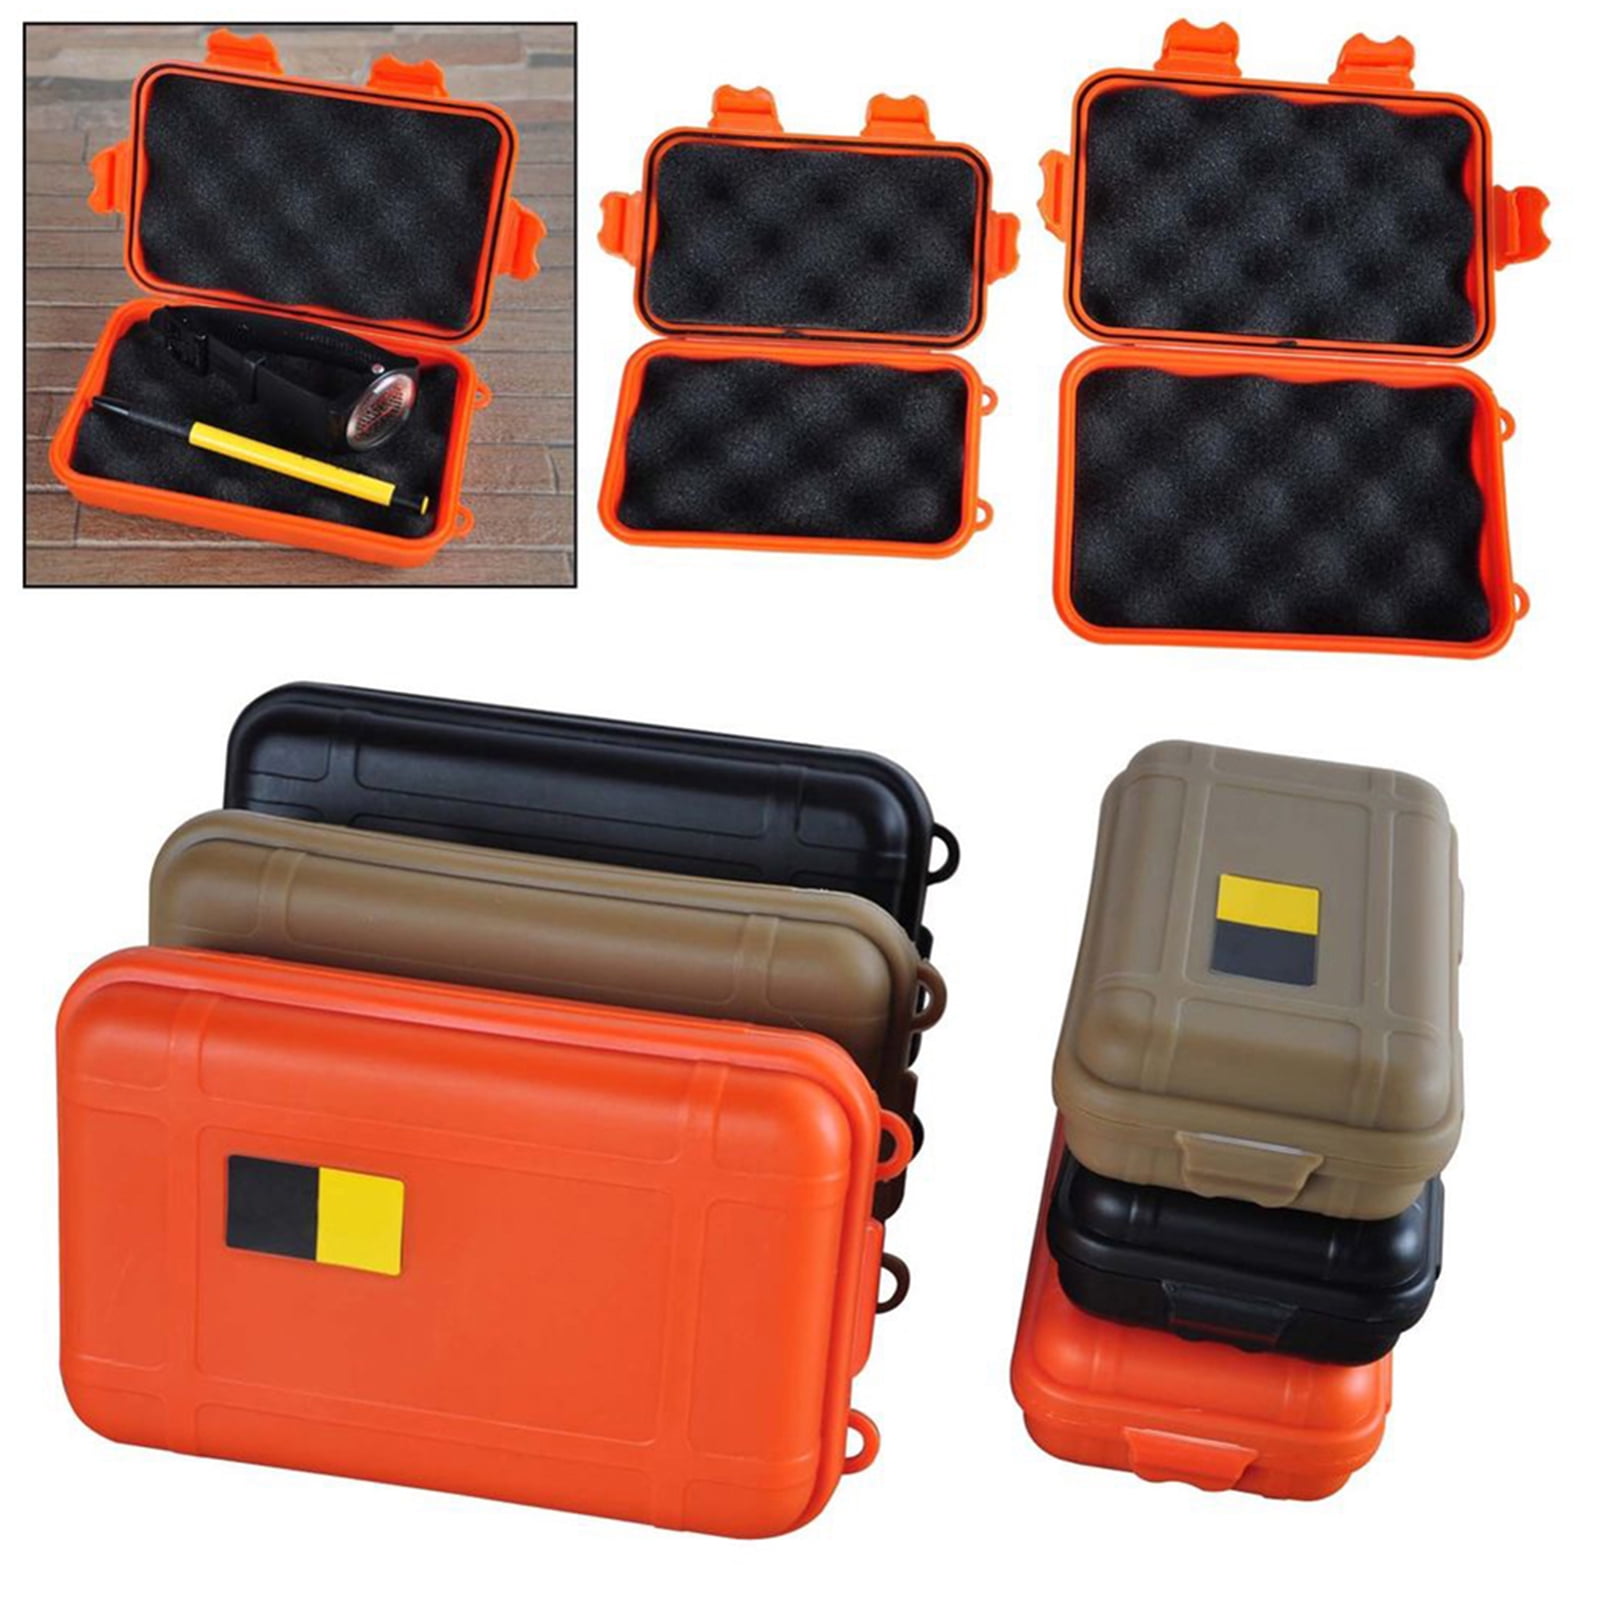 Survival Airtight Case Shockproof Waterproof outdoor tools Storage Container Box 